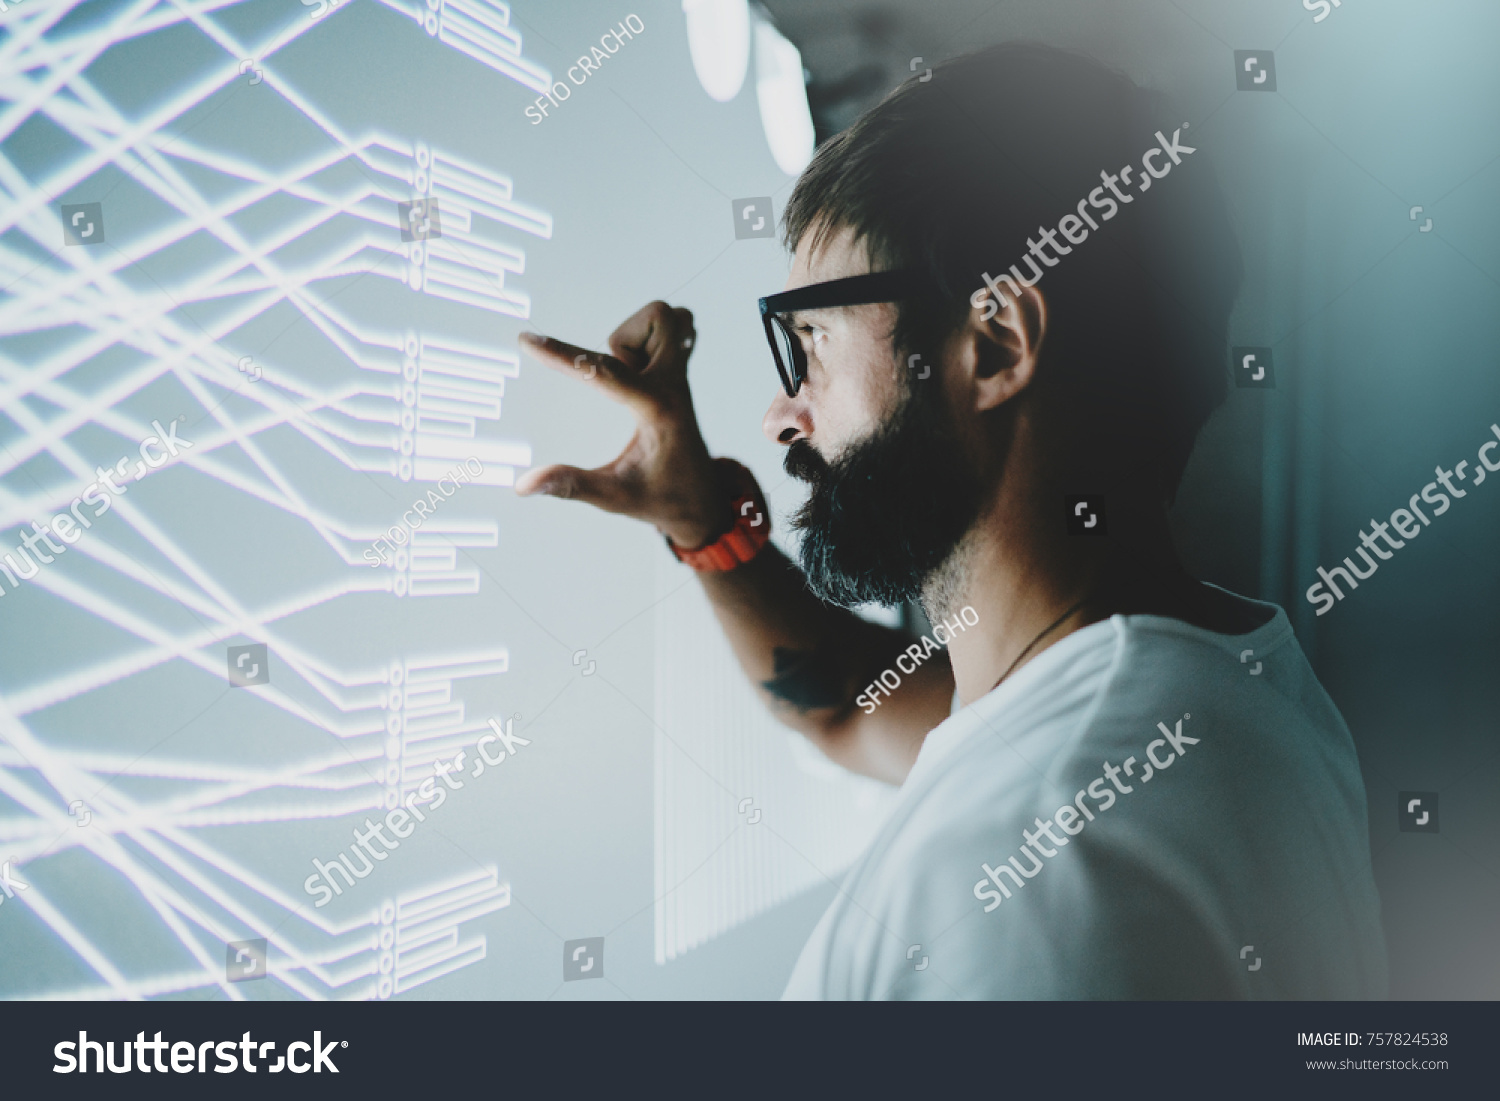 Concept of virtual panel display,diagram,digital graph interfaces.Attractive coworker touching virtual panel with graphs.Blurred background. Horizontal #757824538